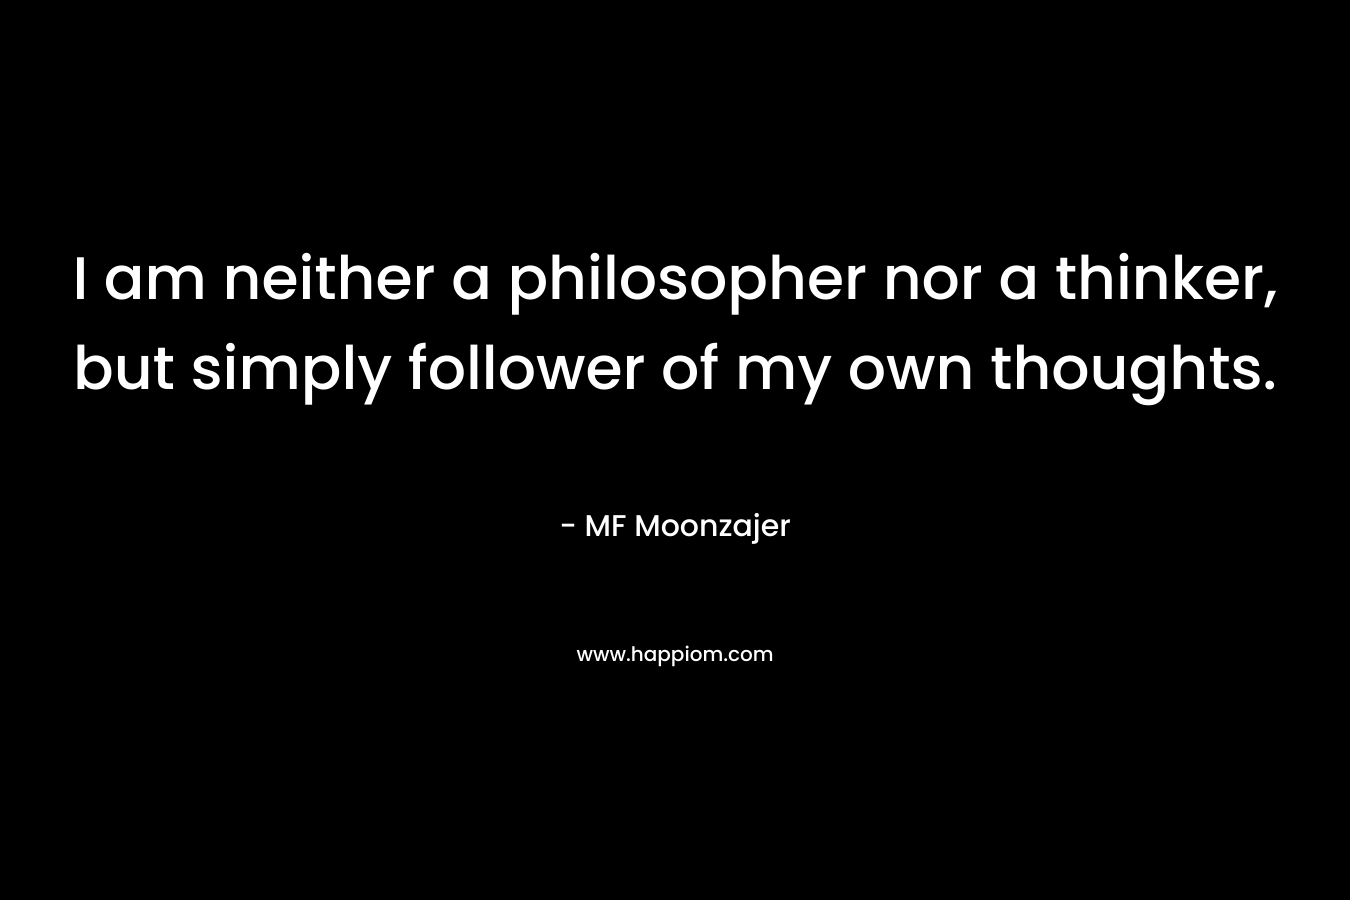 I am neither a philosopher nor a thinker, but simply follower of my own thoughts. – MF Moonzajer